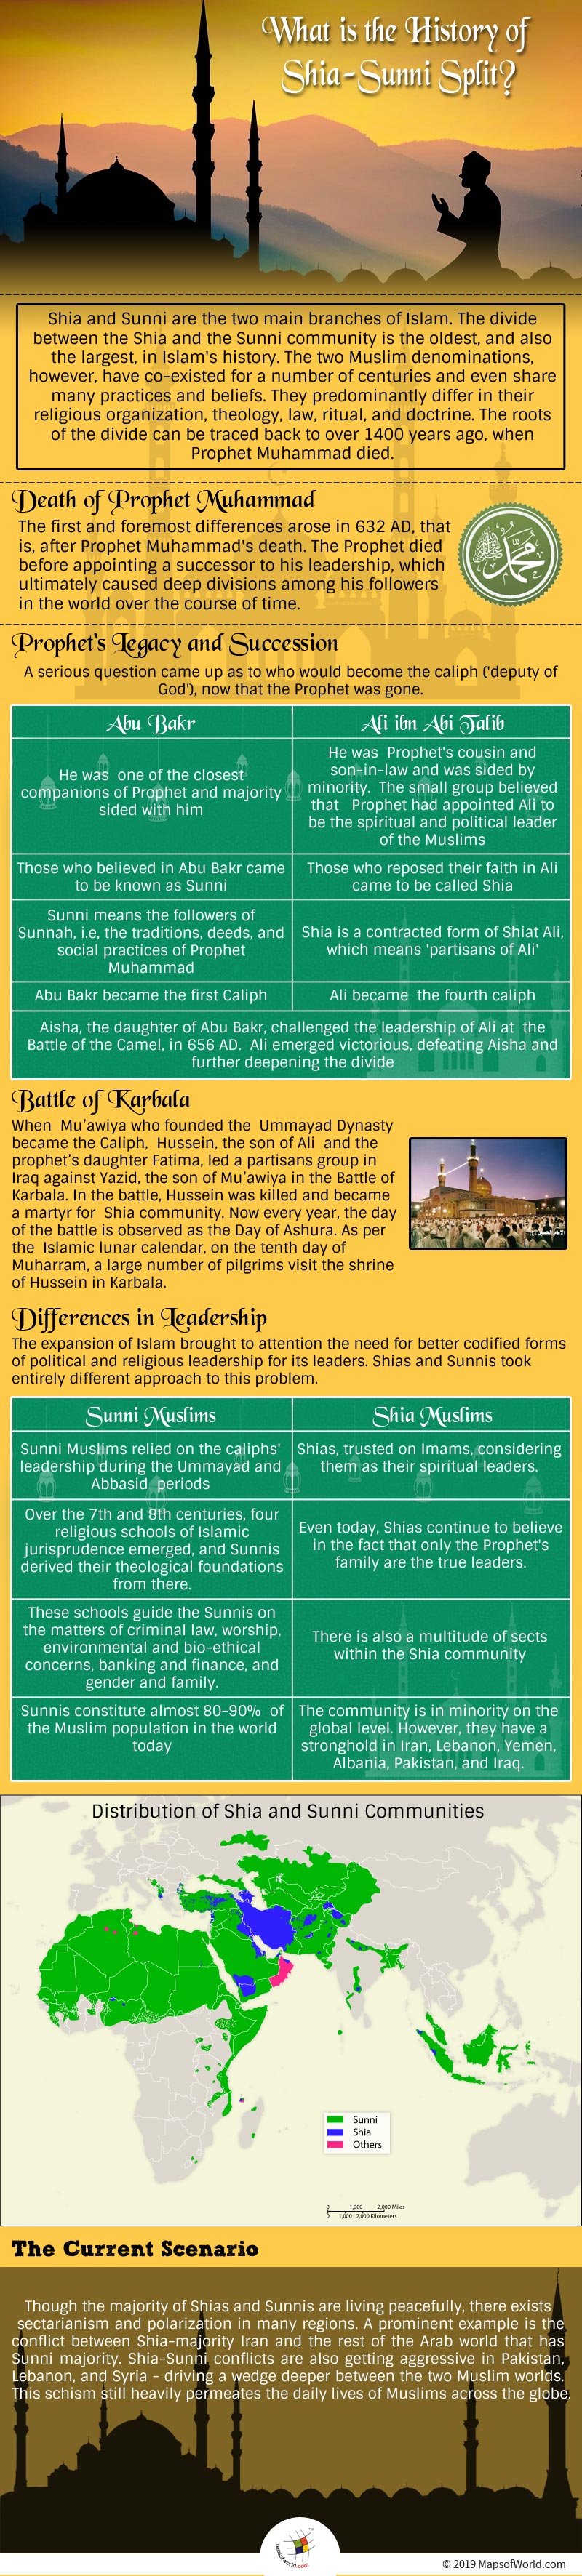 Infographic Showing The History of Shia-Sunni Split